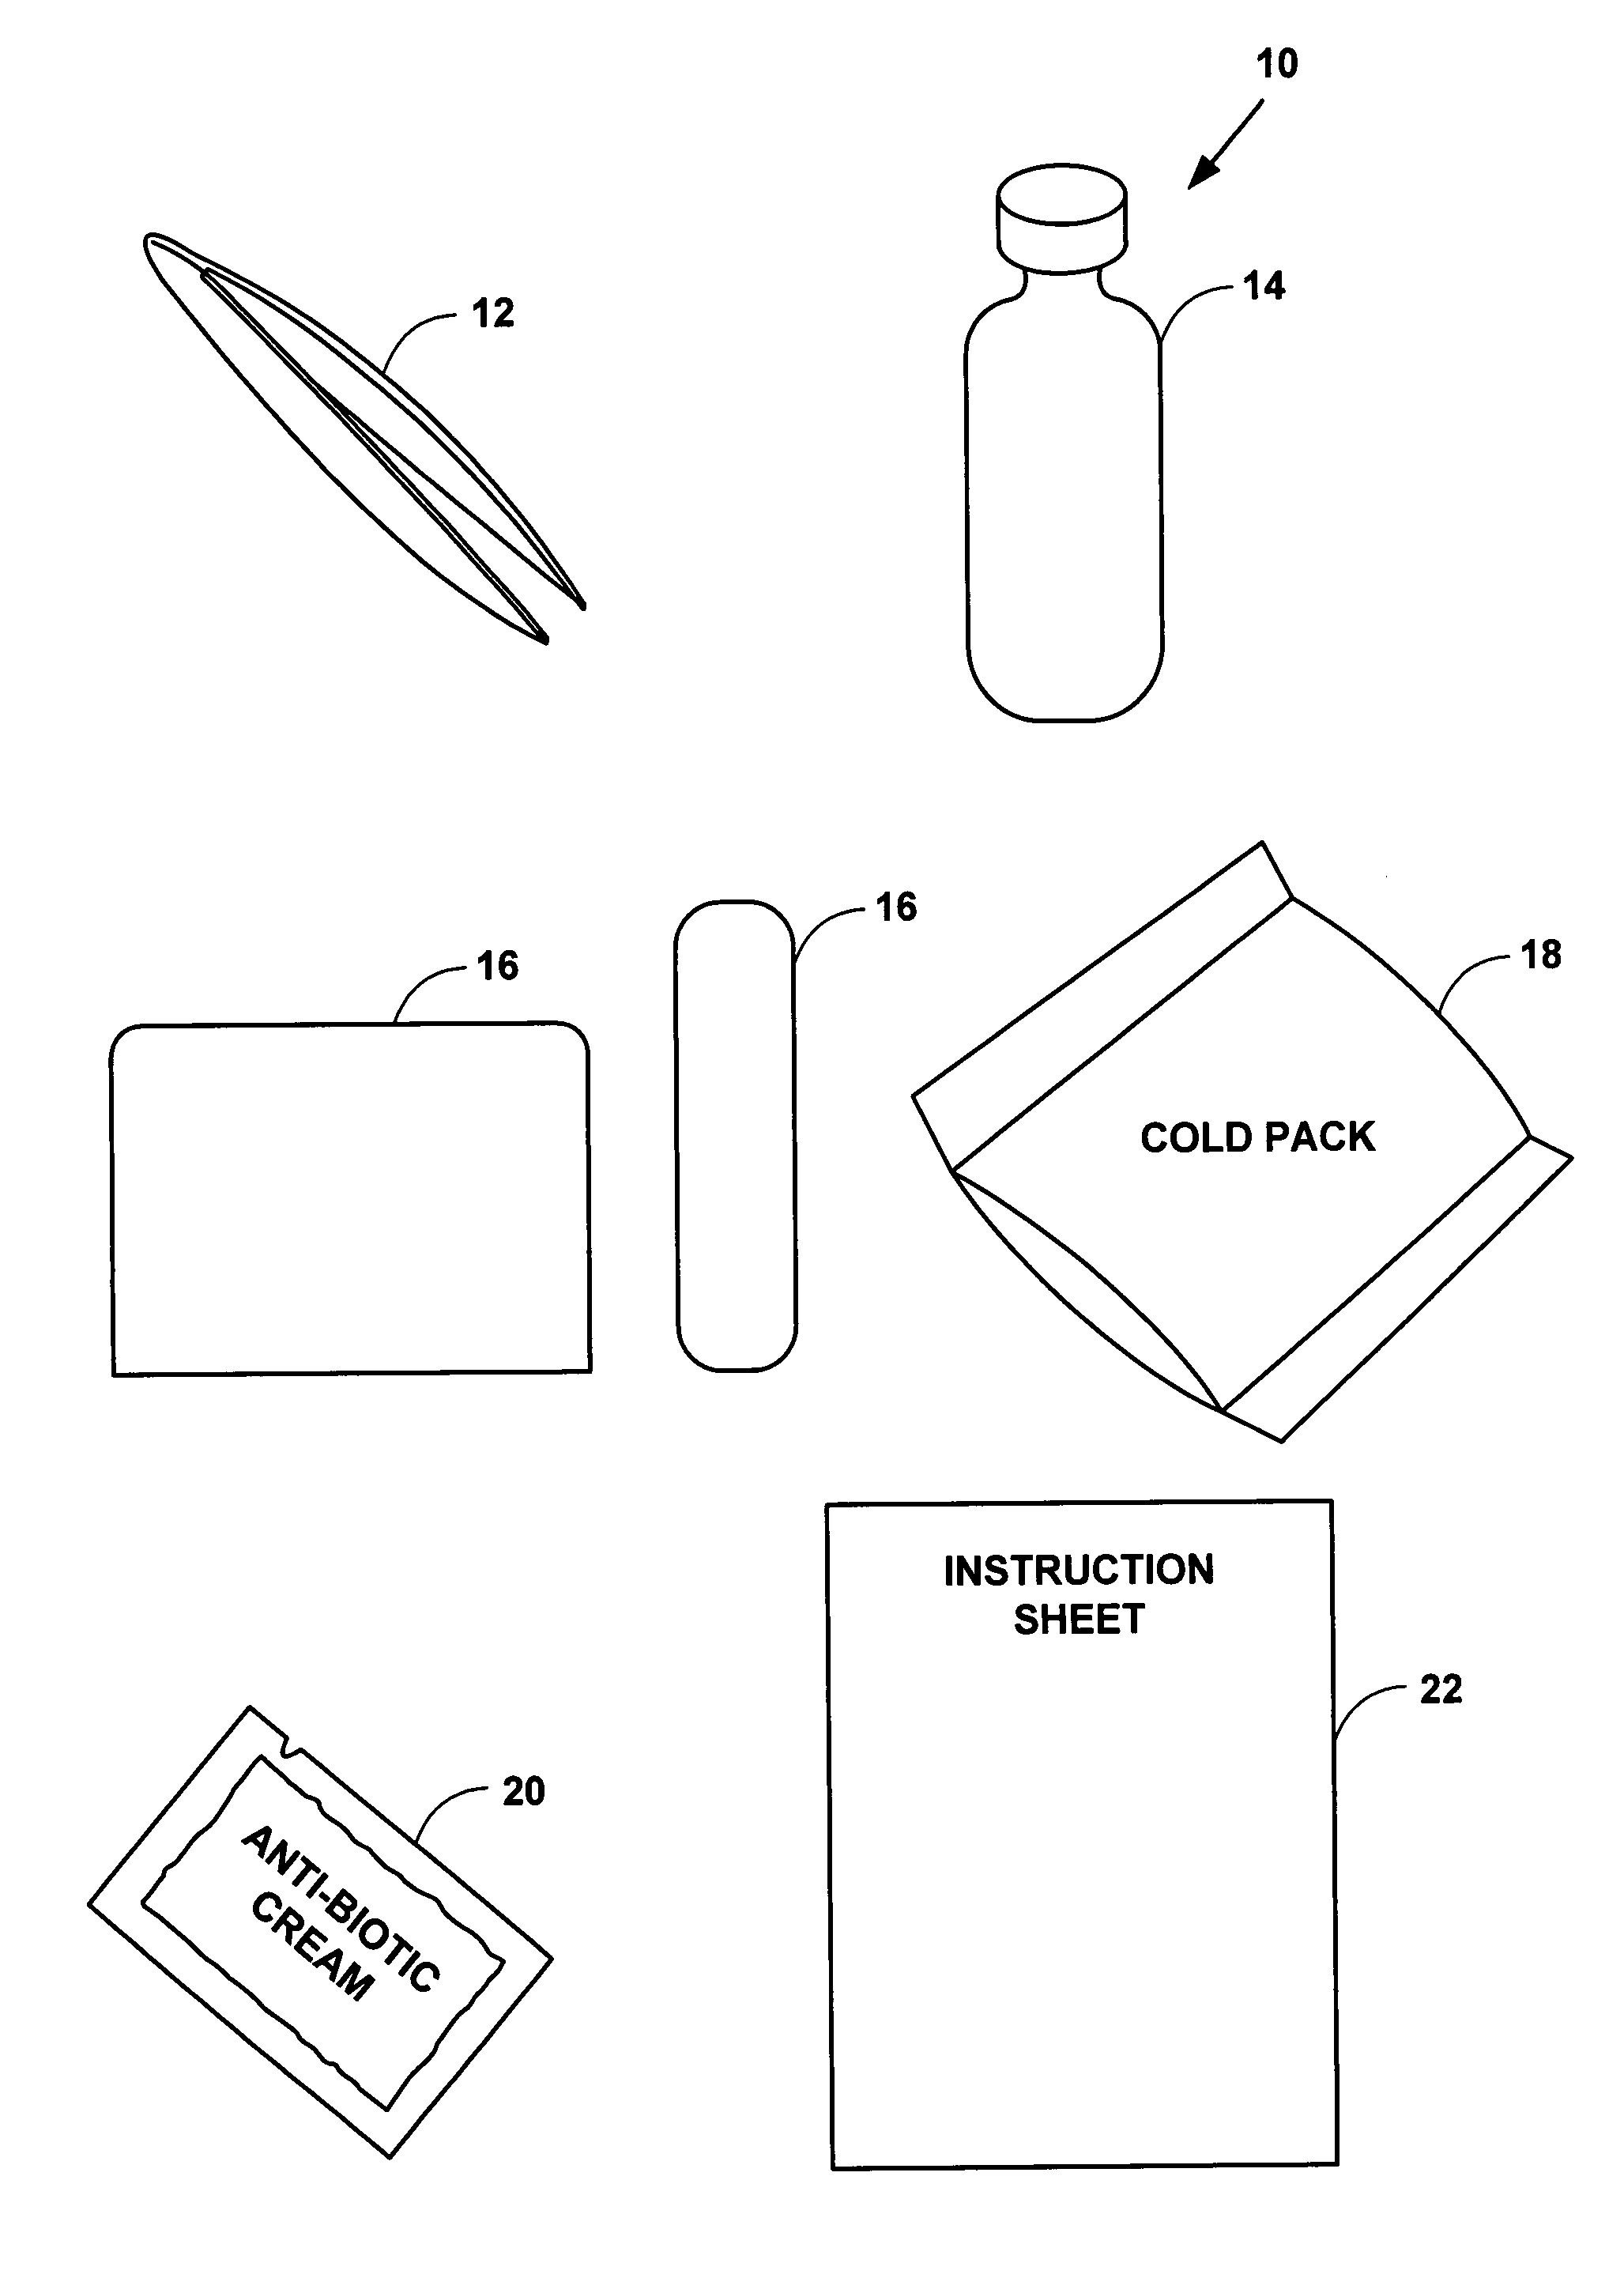 Sting kit apparatus and method of use